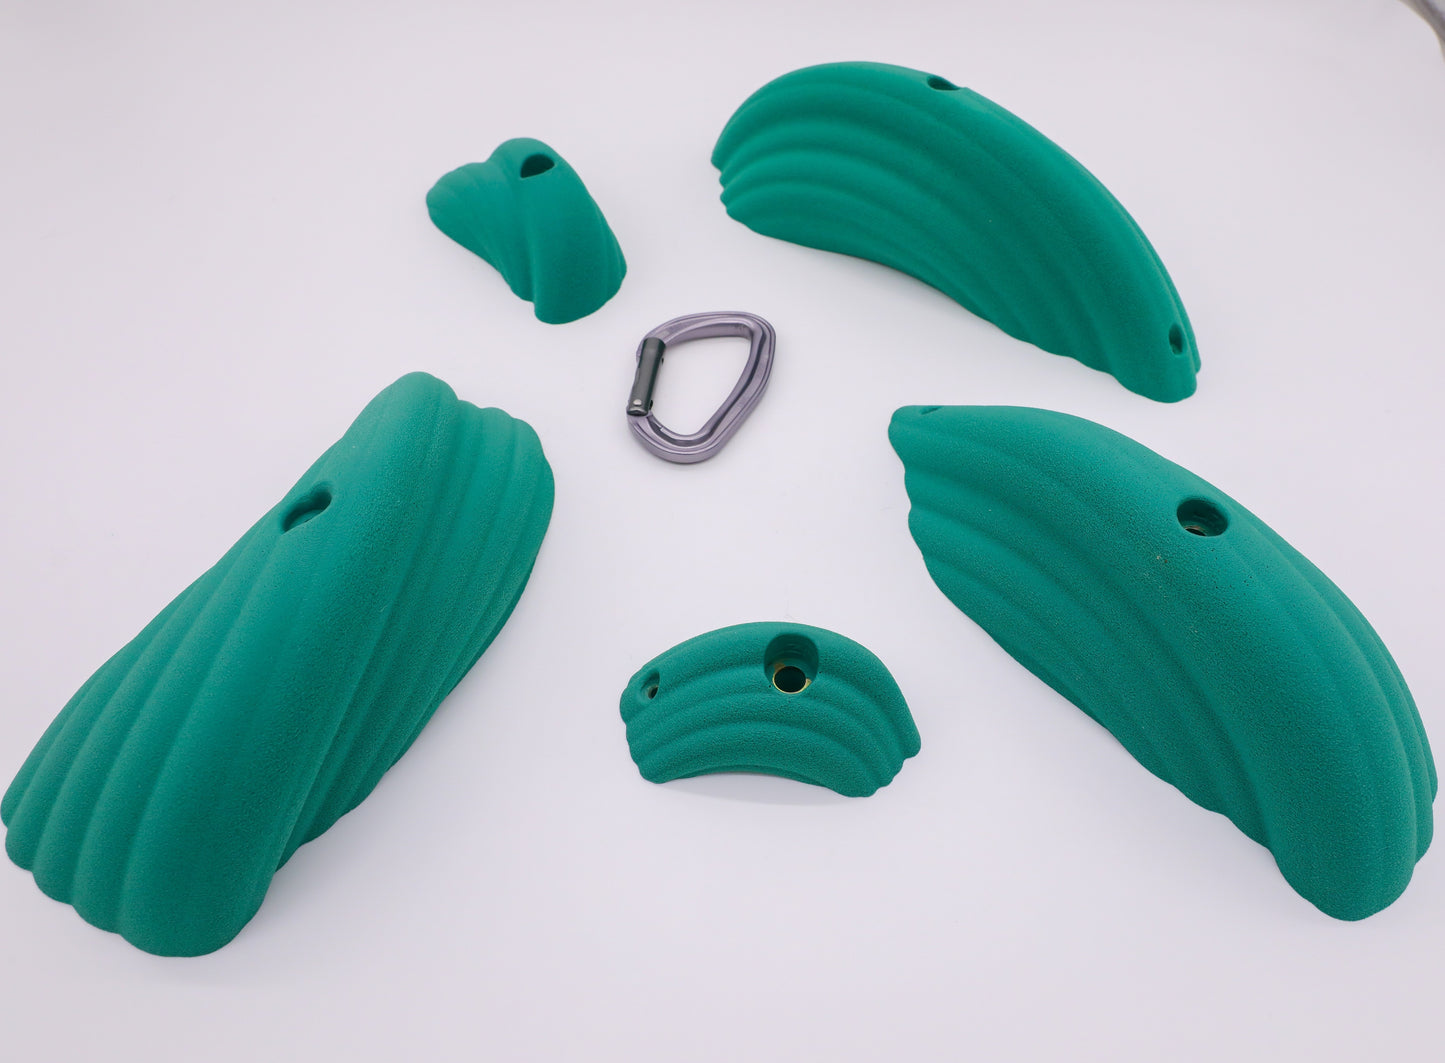 Bolt On Climbing Holds, Swarm Pinches 5 Piece Set